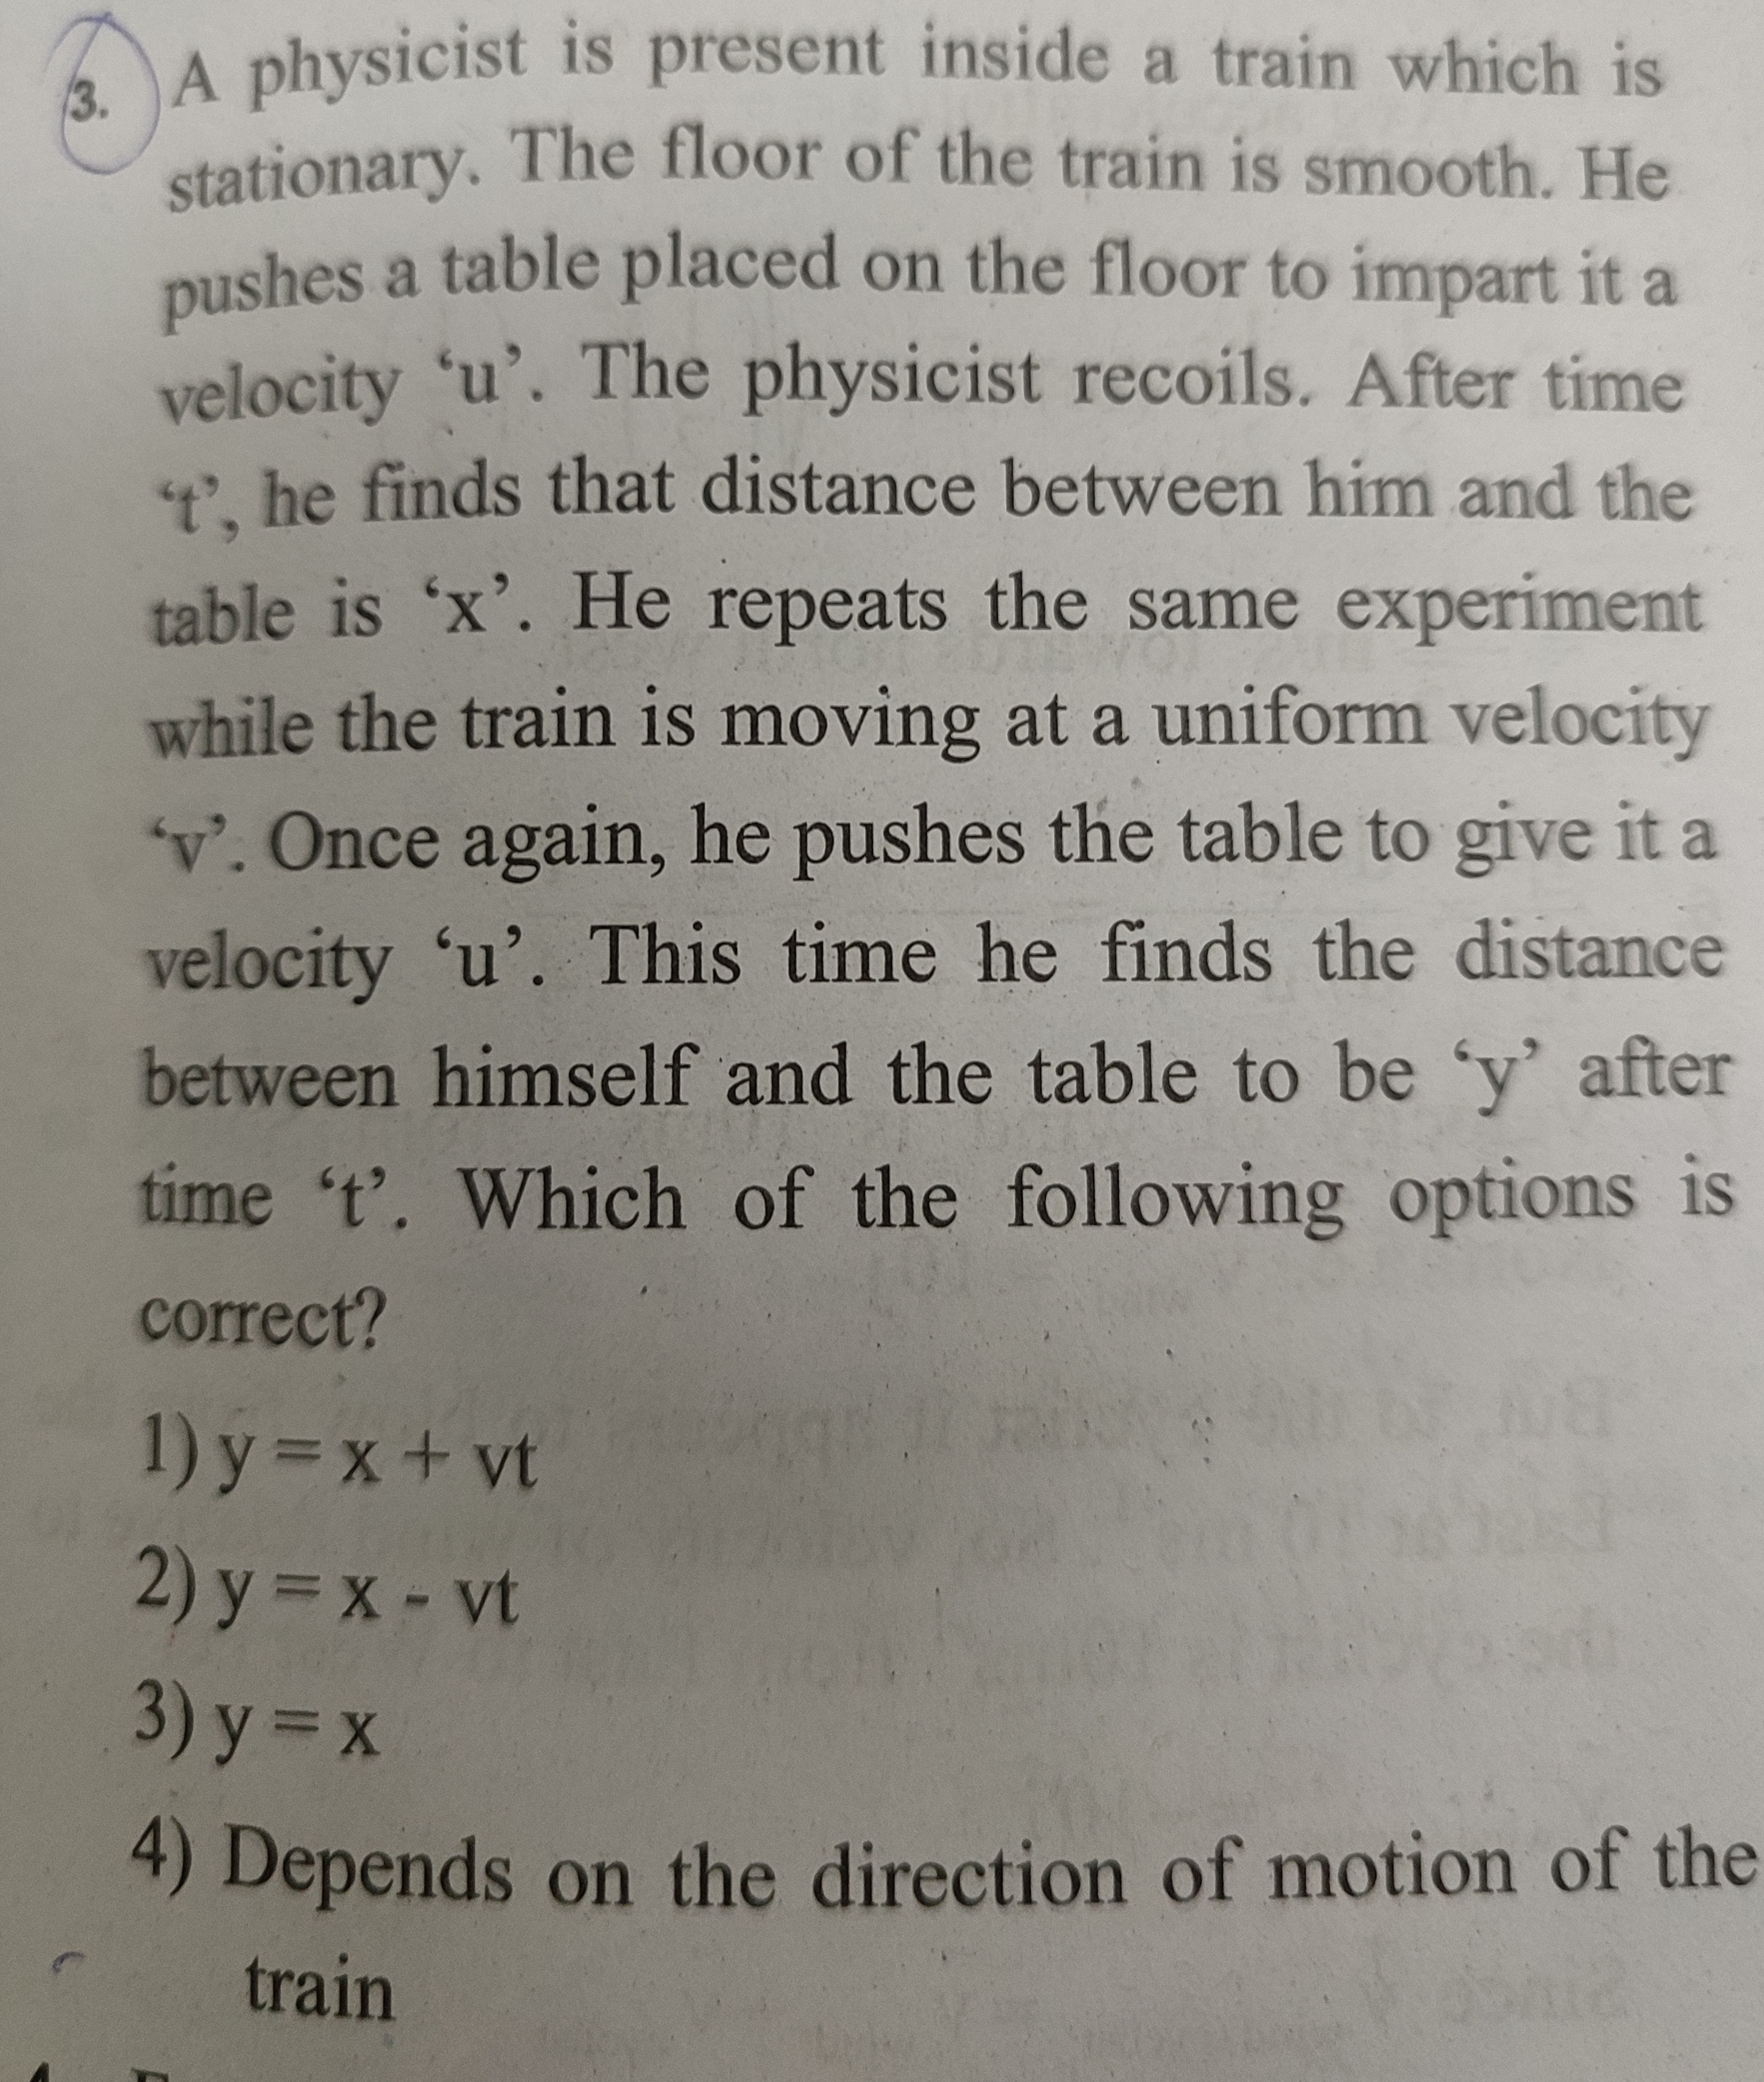 A physicist is present inside a train which is stationary. The floor o